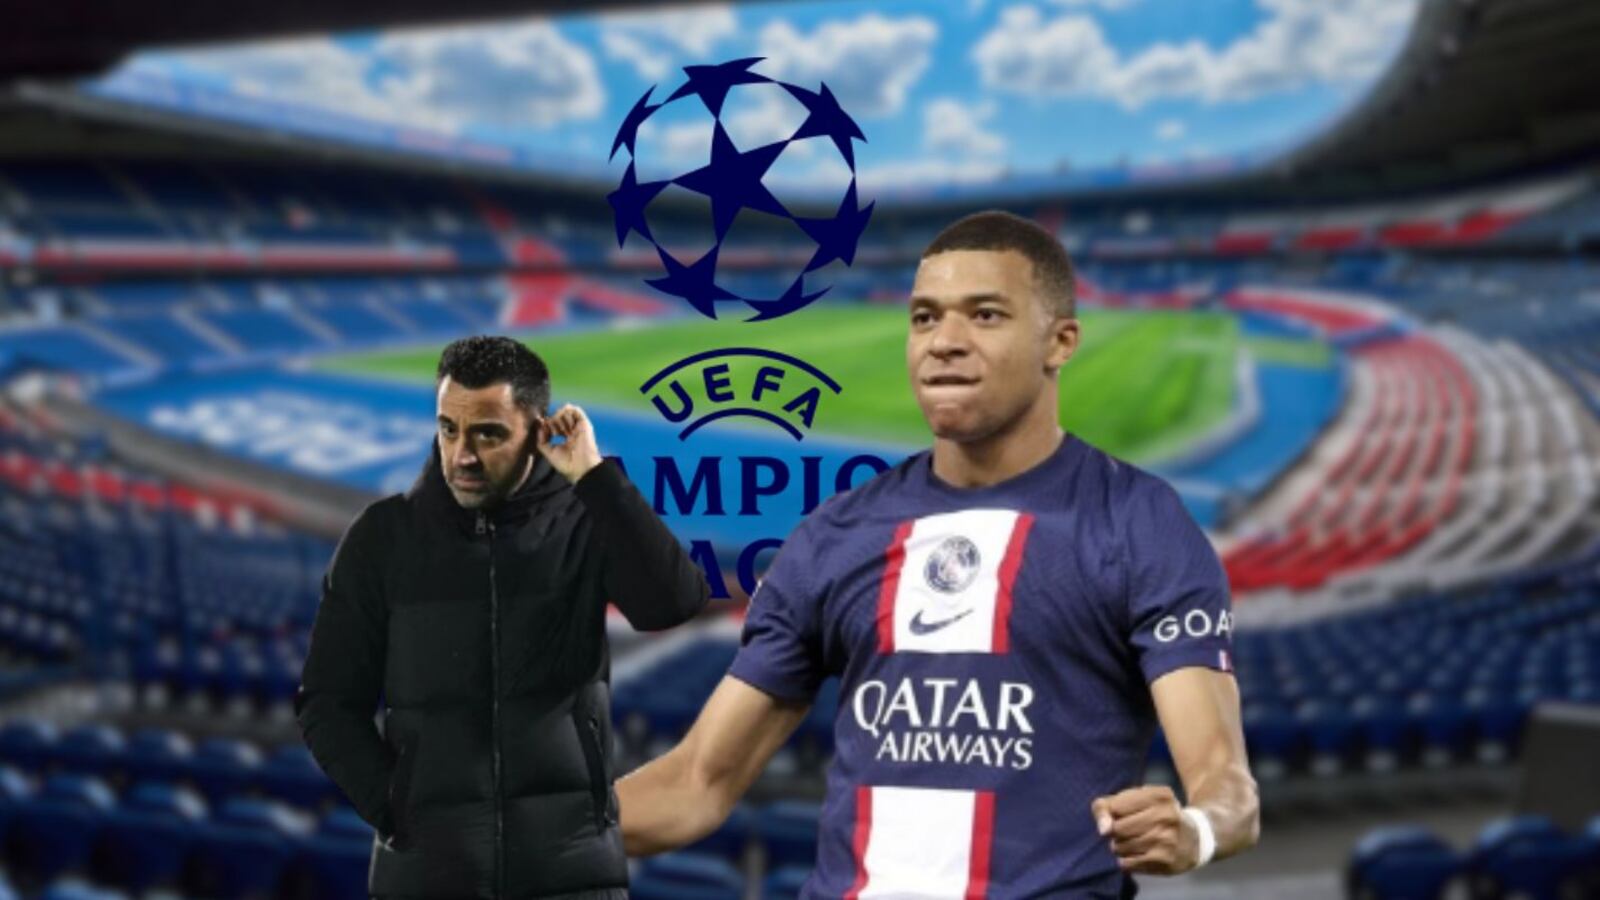 Mbappé's incredible warning to Barcelona before UCL clash, Xavi trembles